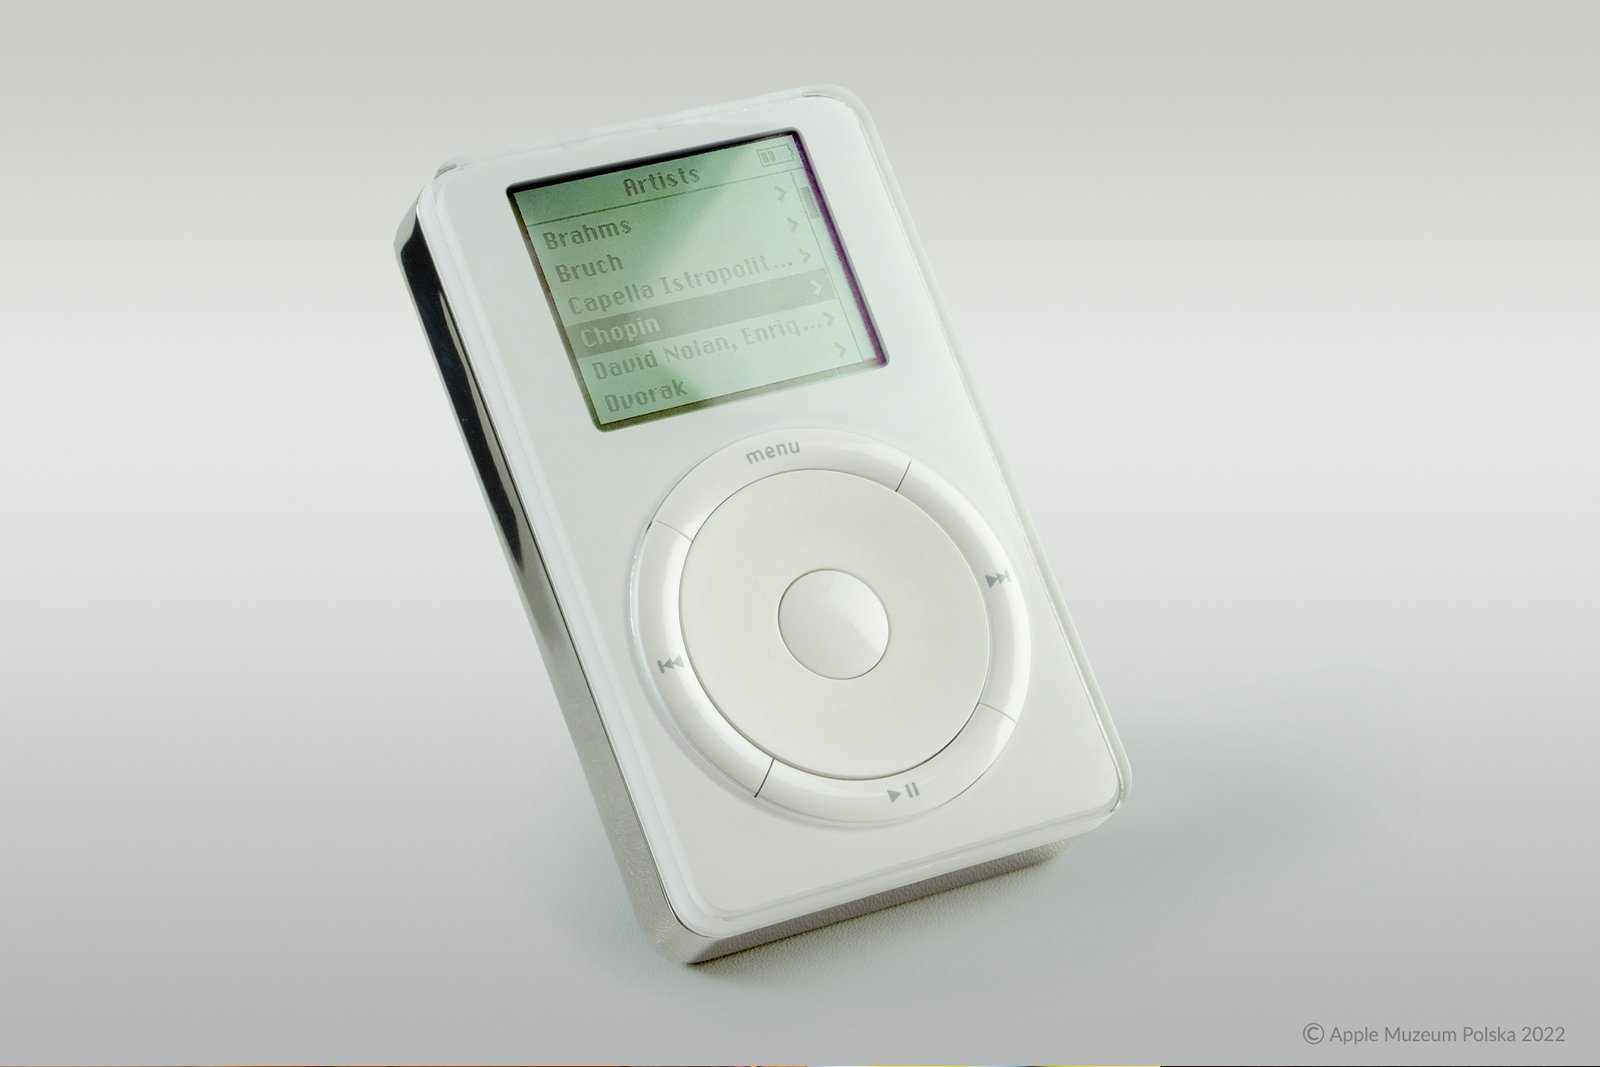 iPod with Touch Wheel